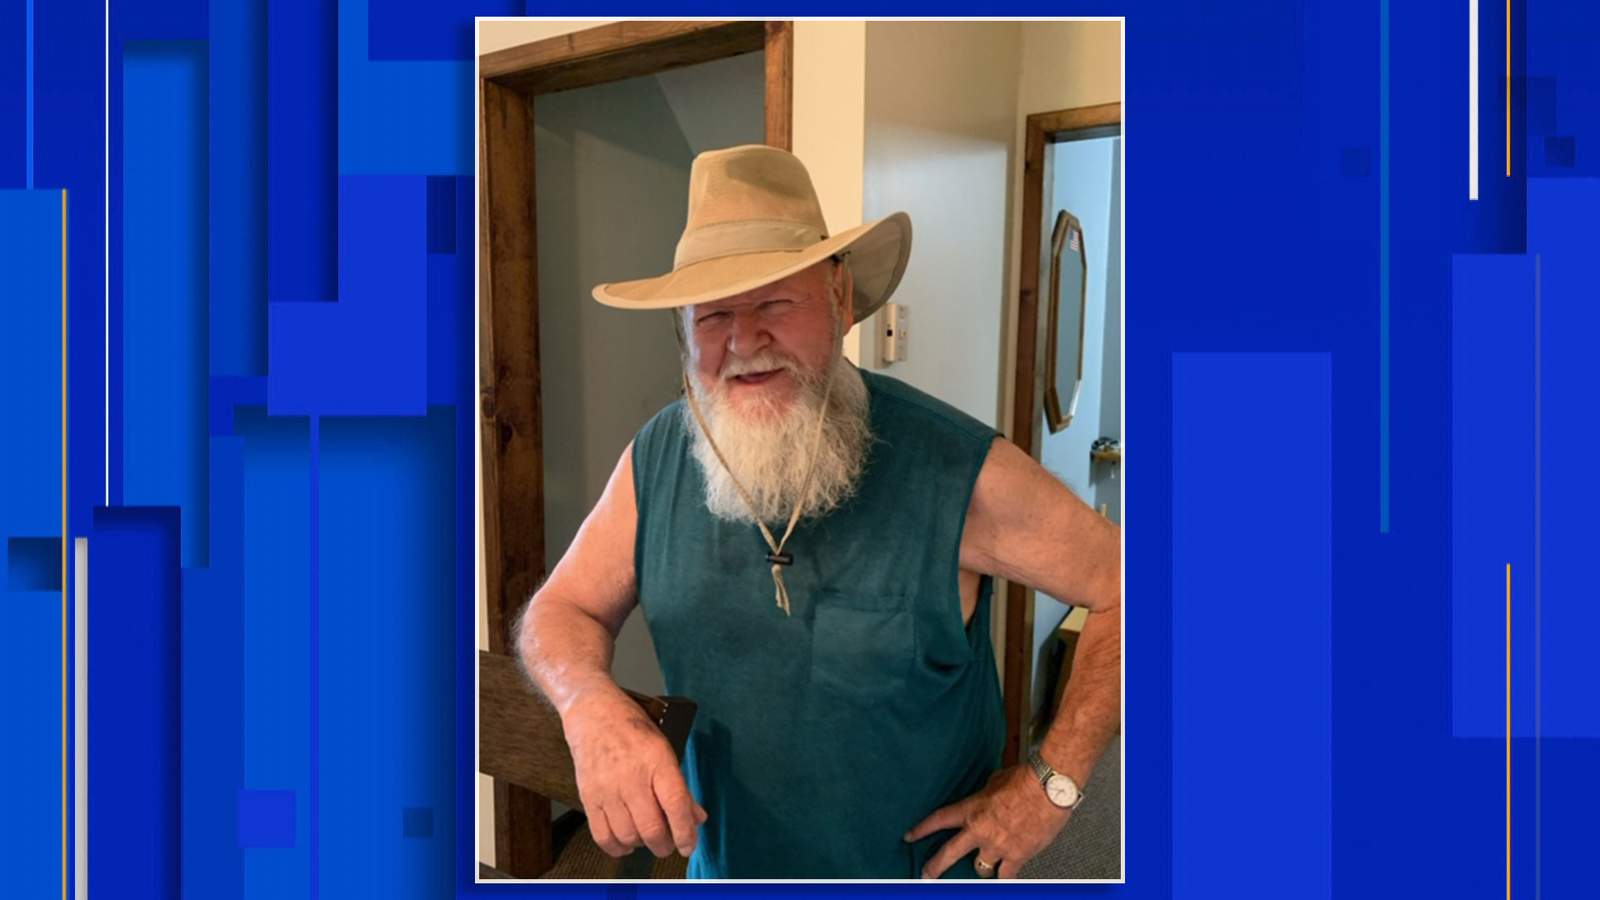 Michigan State Police seek missing 78-year-old man in early stages of dementia